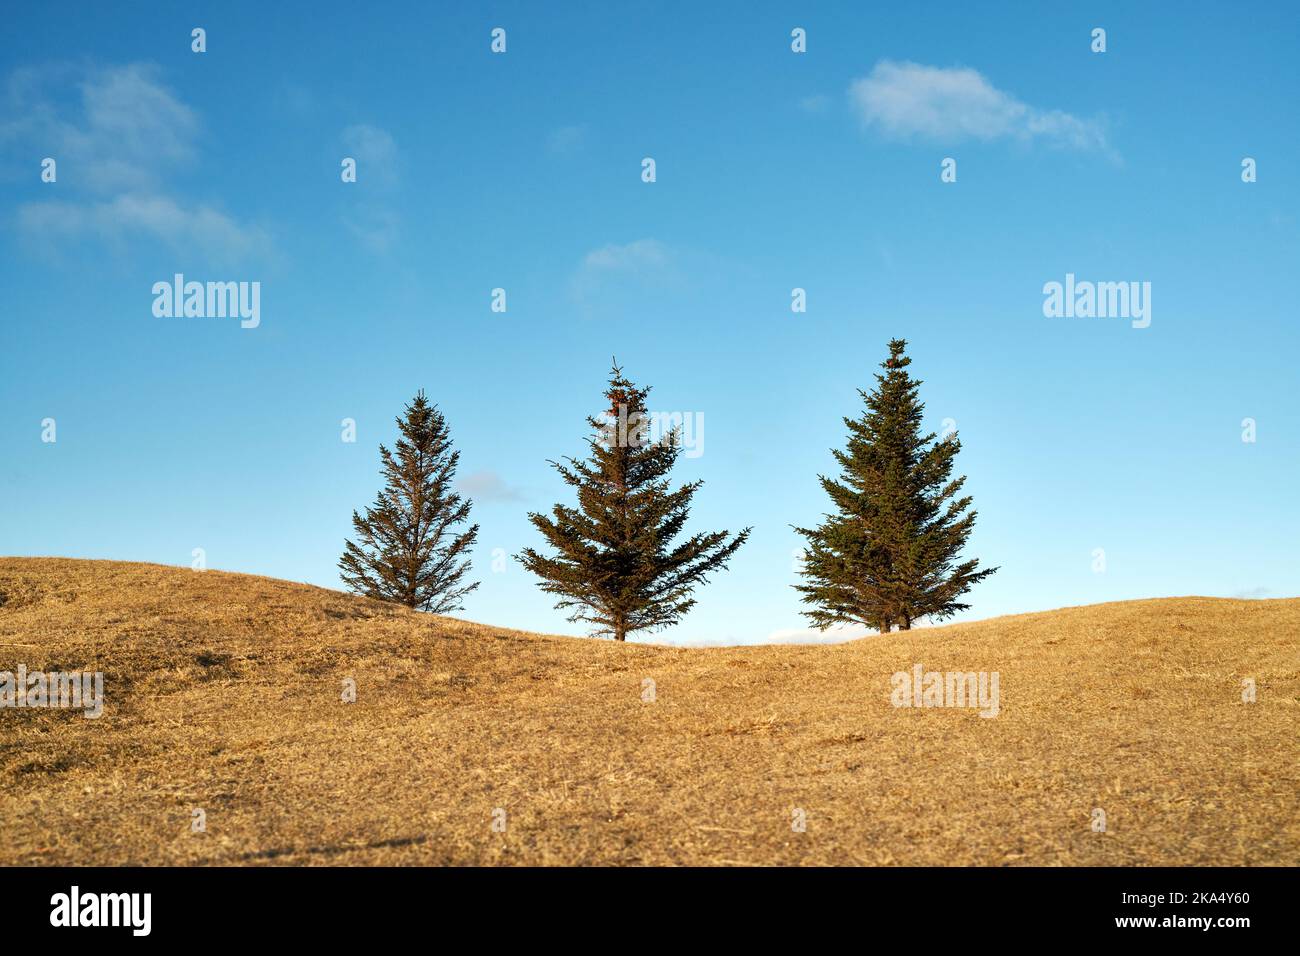 Coniferous trees growing on hill Stock Photo